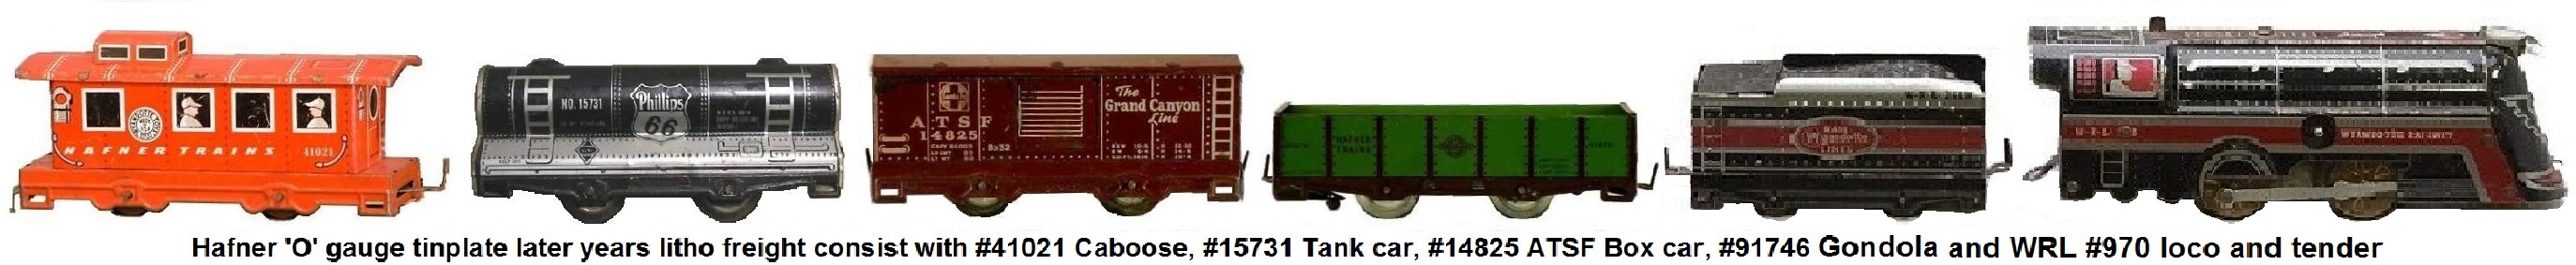 Hafner 'O' gauge mixed freight consist of later Wyandotte 4 wheel tinplate lithographed cars and the Wyandotte #970 Locomotive and tender